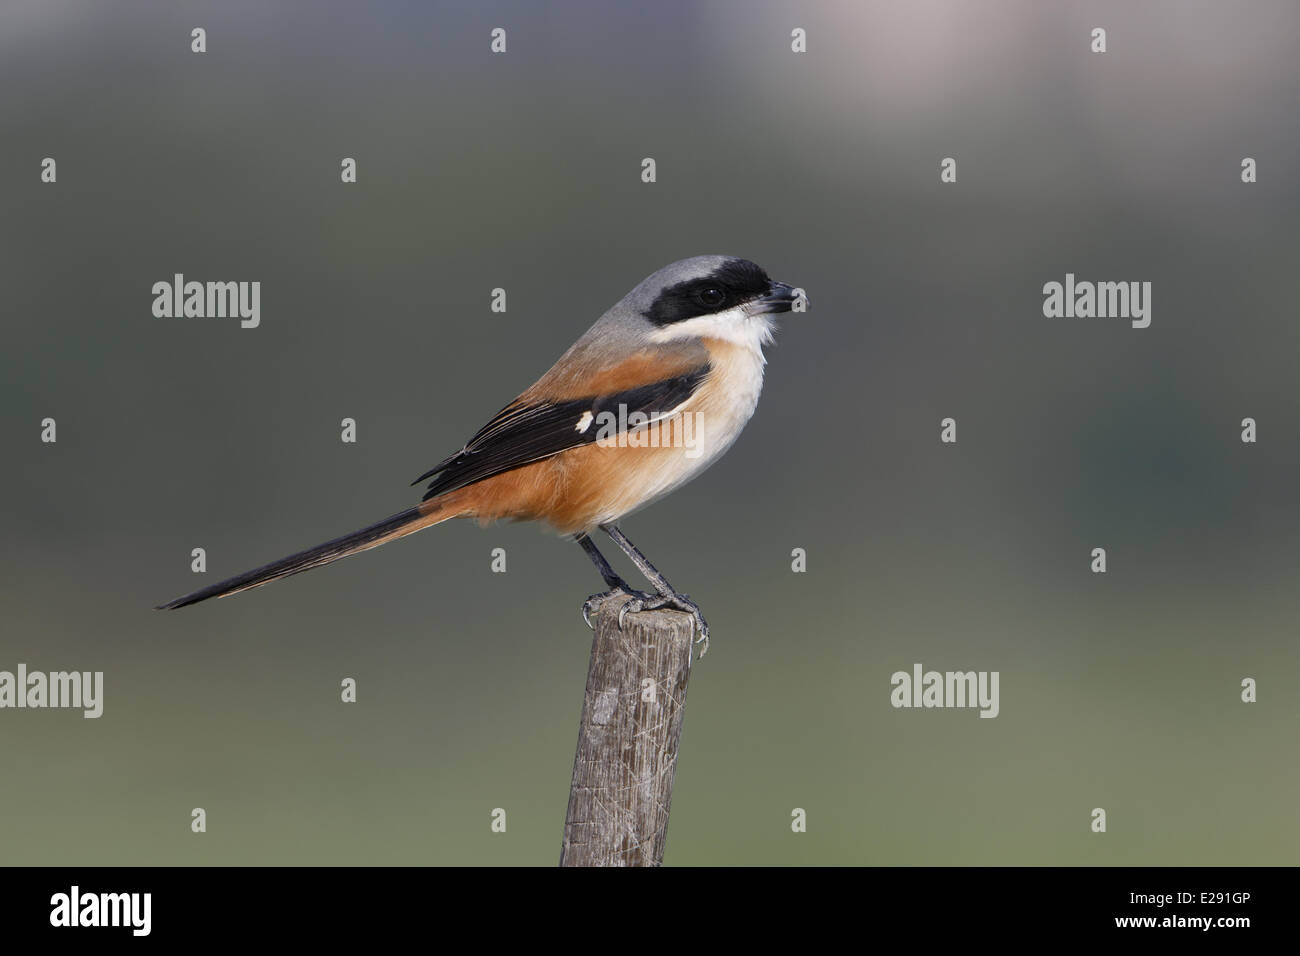 Long-tailed Shrike (Lanius schach) adult, perched on stick, Hong Kong, China, December Stock Photo